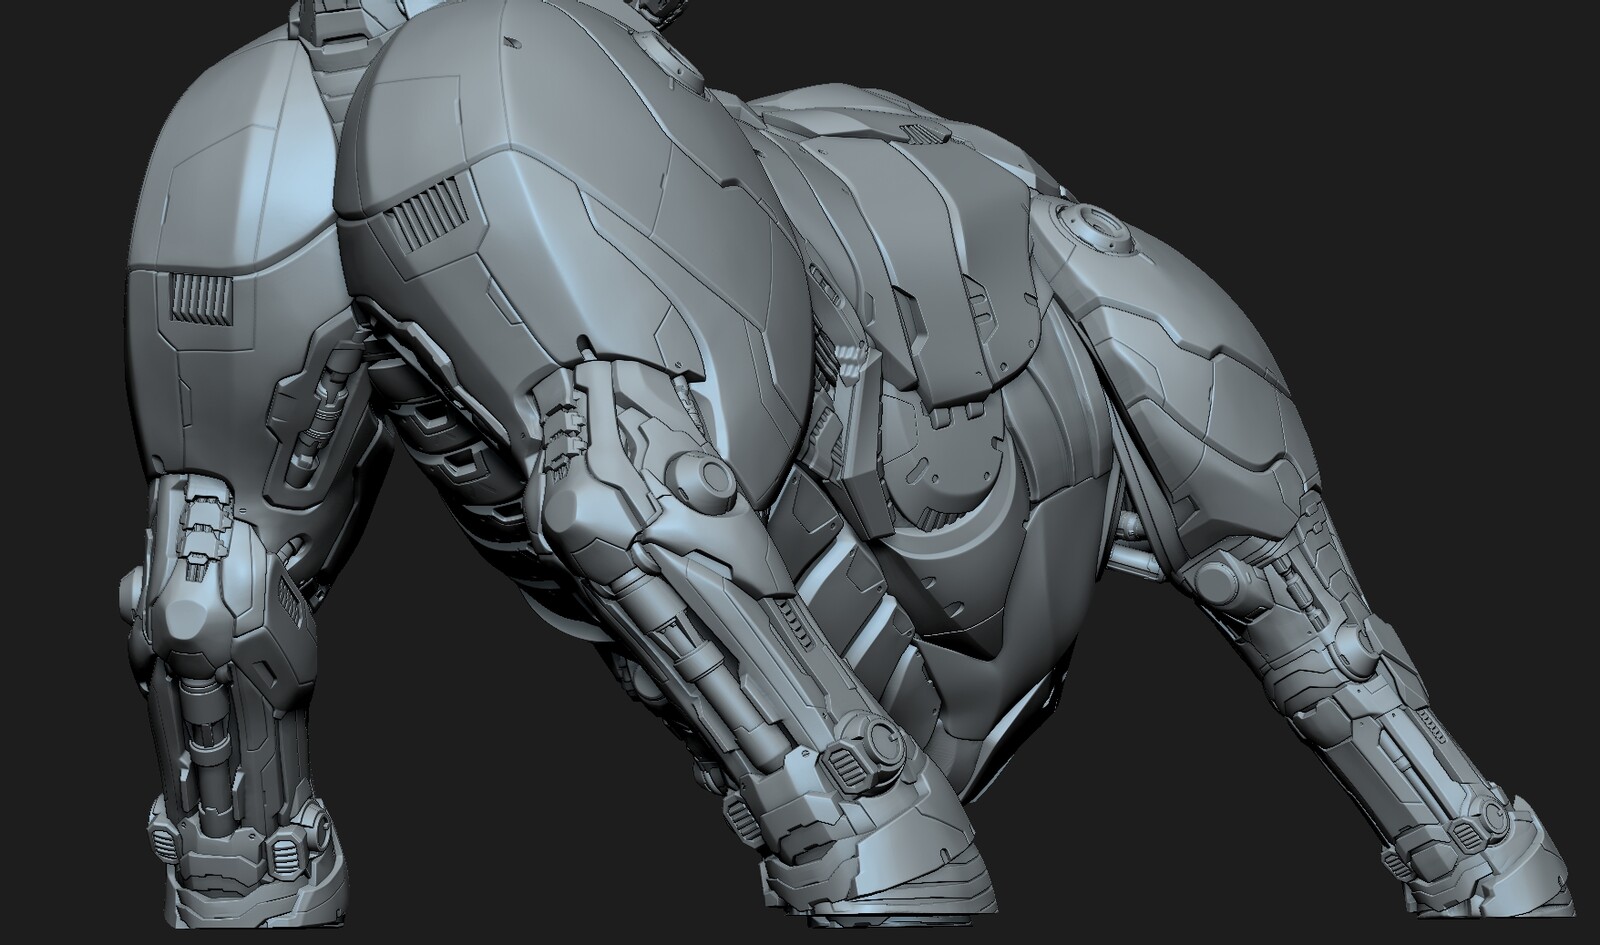 I sculpted the legs, working from Furio's concept, as well as developing the design in areas that were less fleshed out. 